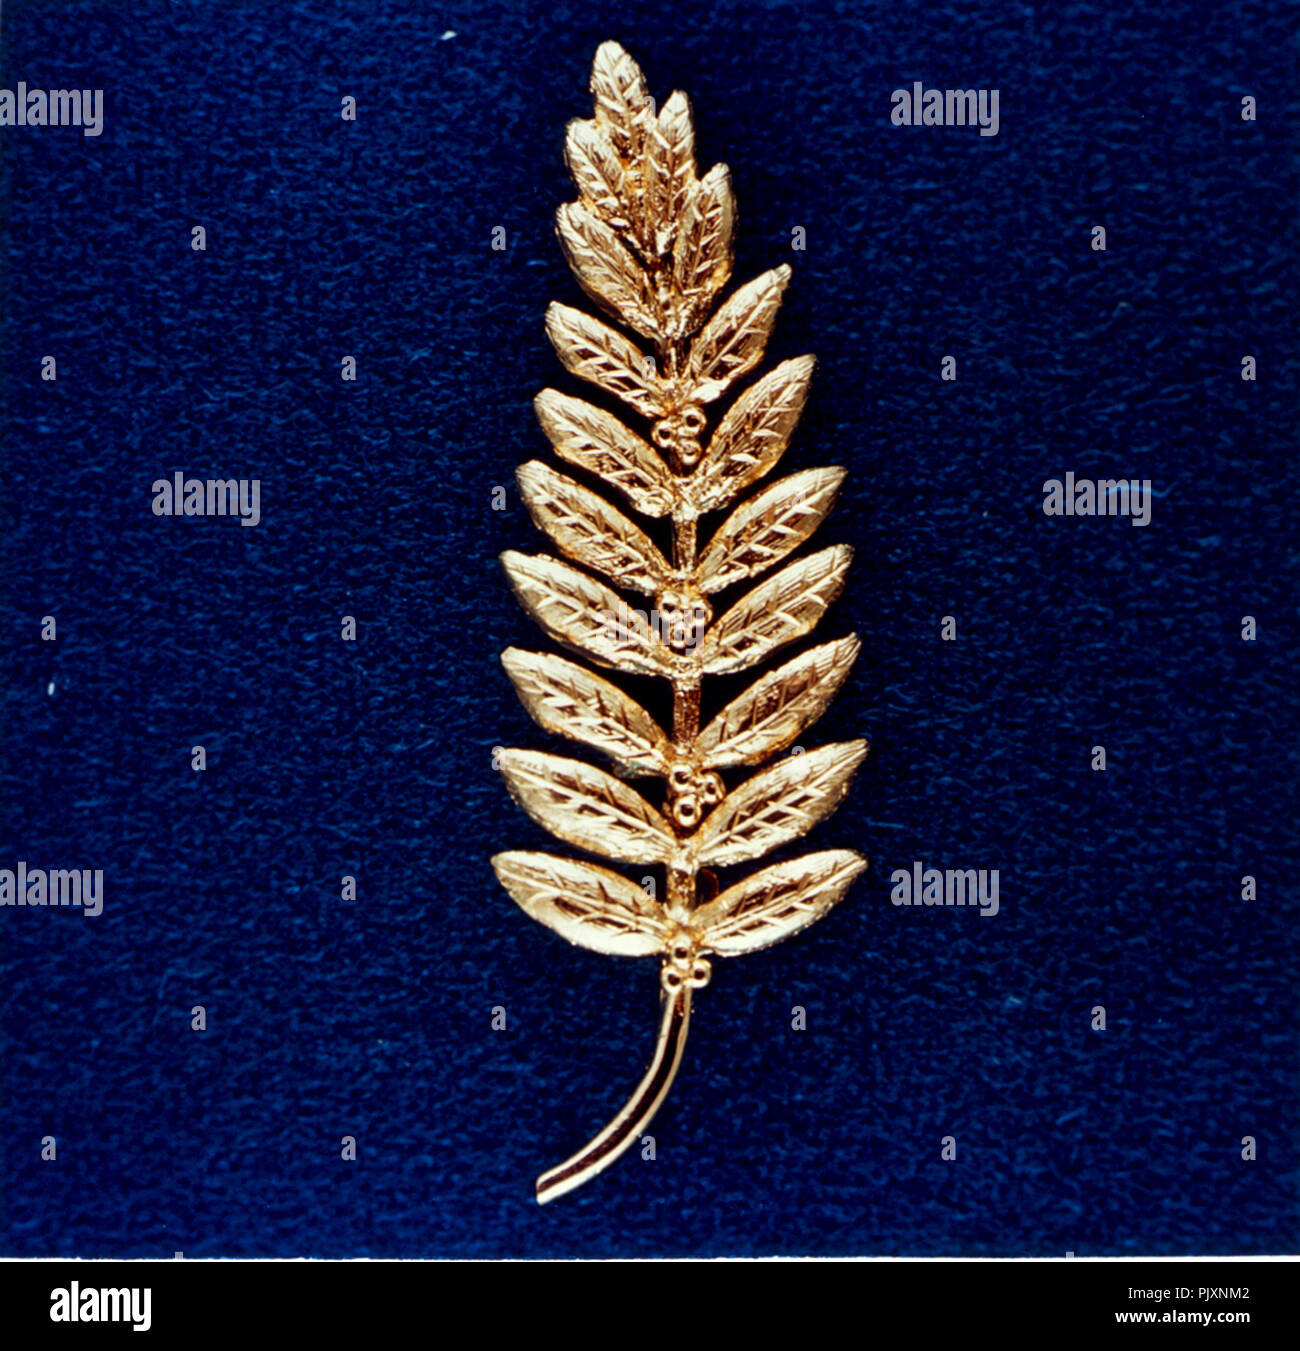 Houston, TX - (FILE) -- This is the gold replica of an olive branch, the traditional symbol of peace, left on the Moon's surface by Apollo 11 crew members, photographed on April 16, 1971. Astronaut Neil A. Armstrong, commander, placed the small replica (less than half a foot in length) on the Moon. The gesture represented a wish for peace for all mankind. Credit: NASA via CNP /MediaPunch Stock Photo